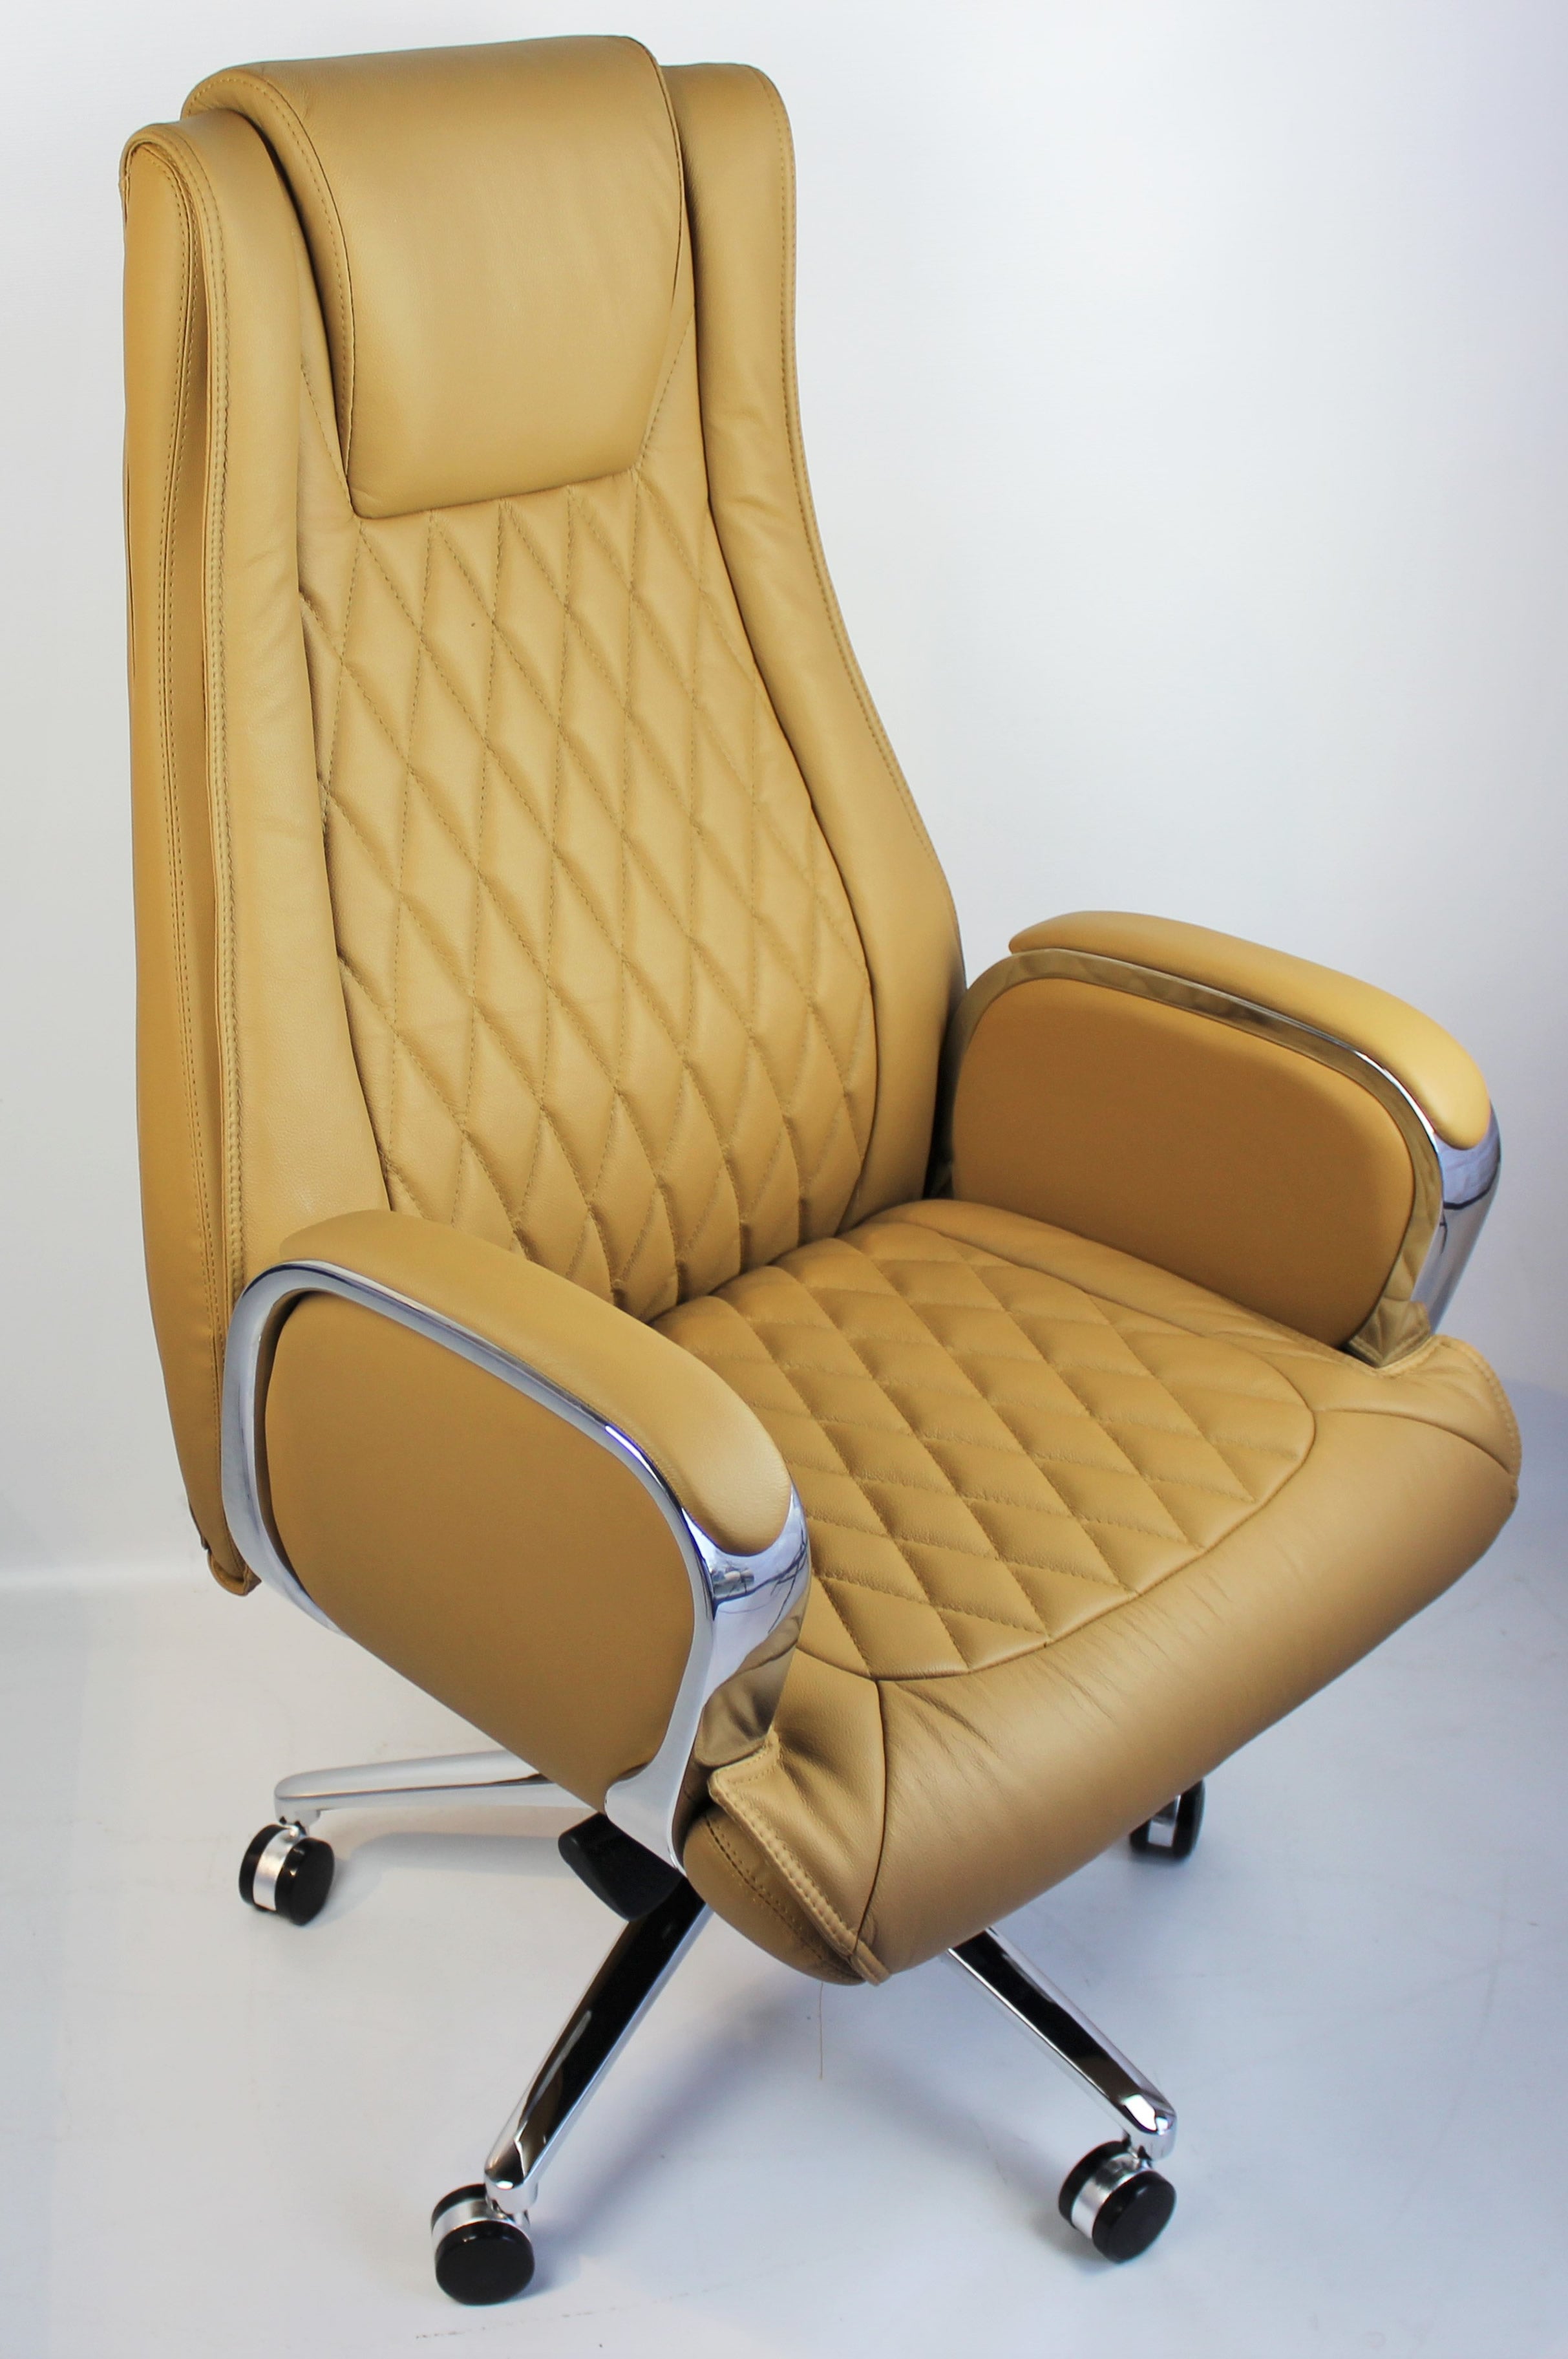 Beige Leather Executive Office Chair - CHA-1202A Huddersfield